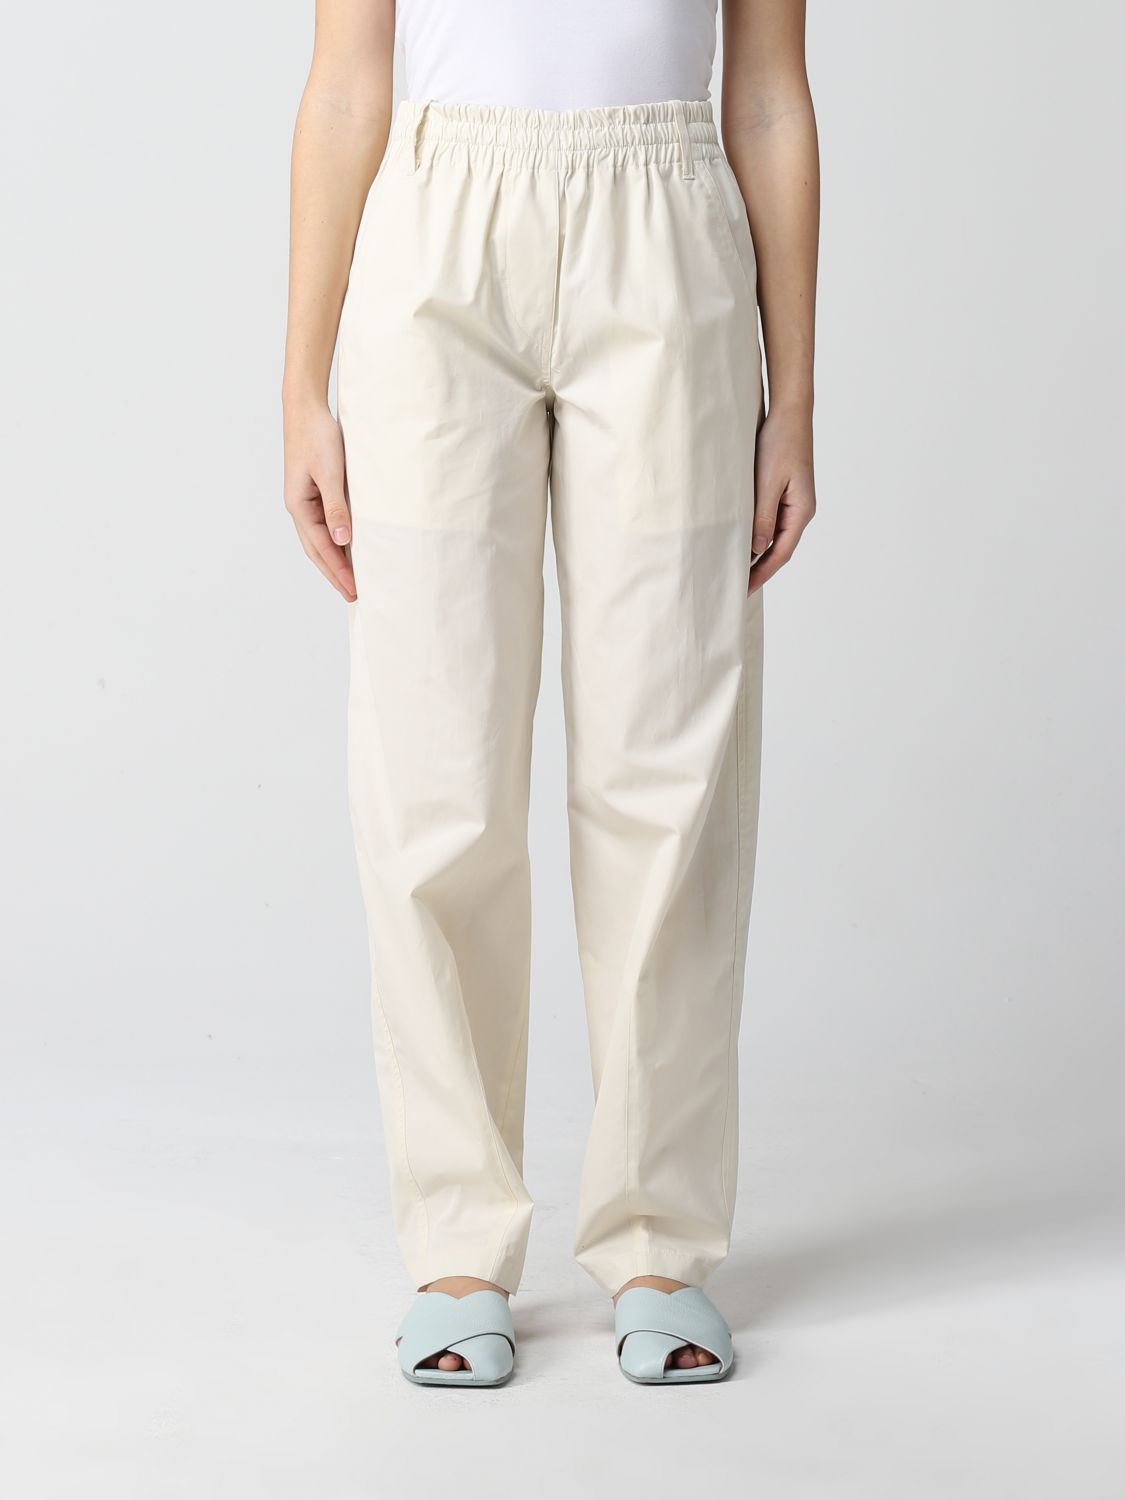 Womens Trousers Cream in White Slacks and Chinos Aspesi Trousers Slacks and Chinos Aspesi Linen Pants 